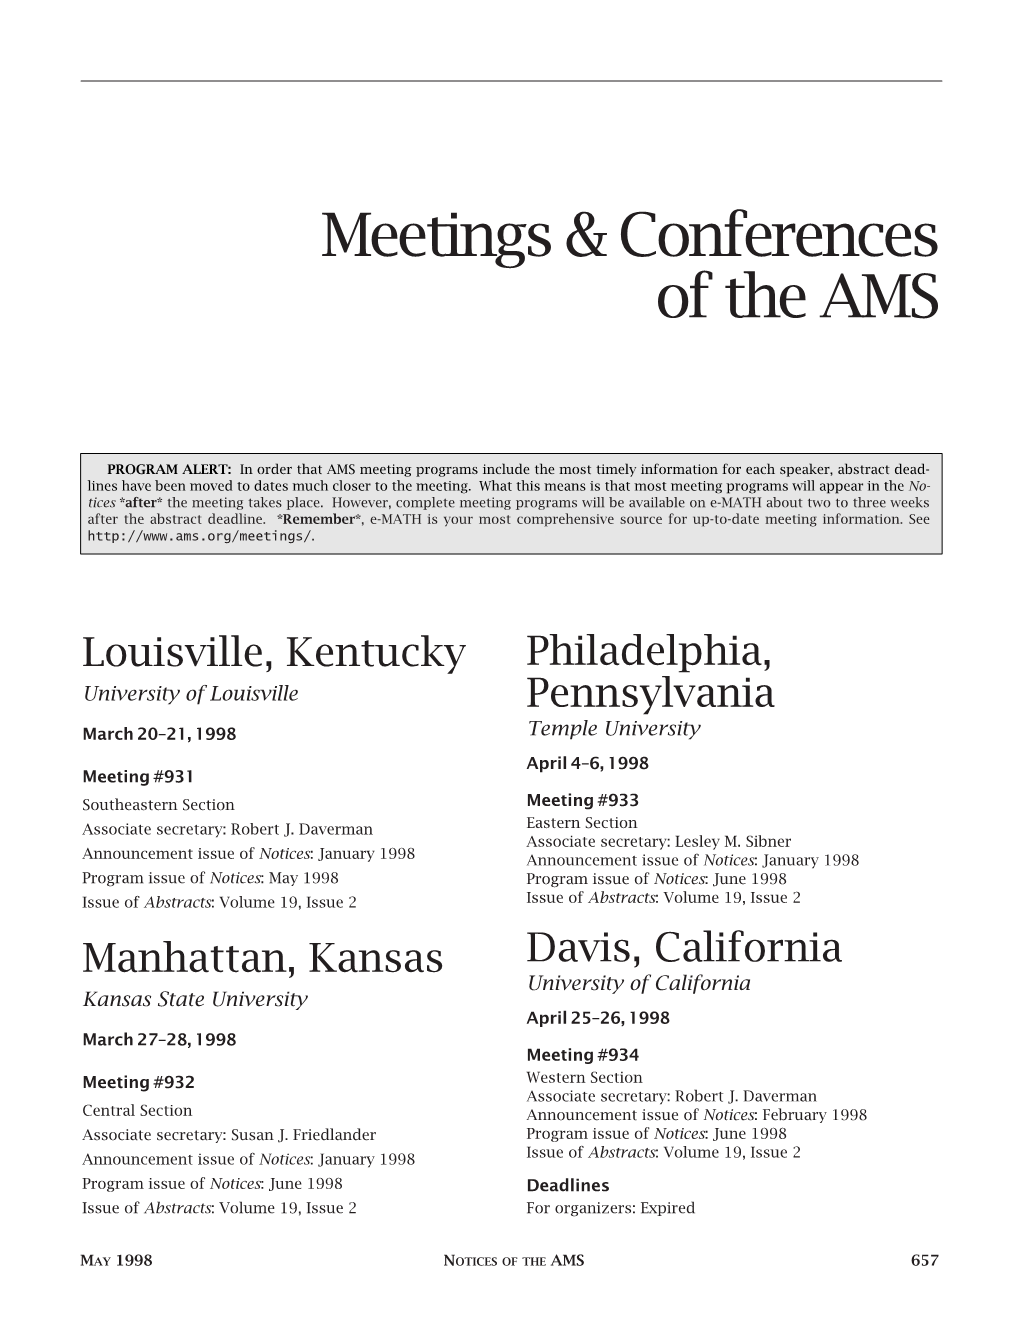 Meetings and Conferences, Volume 45, Number 5